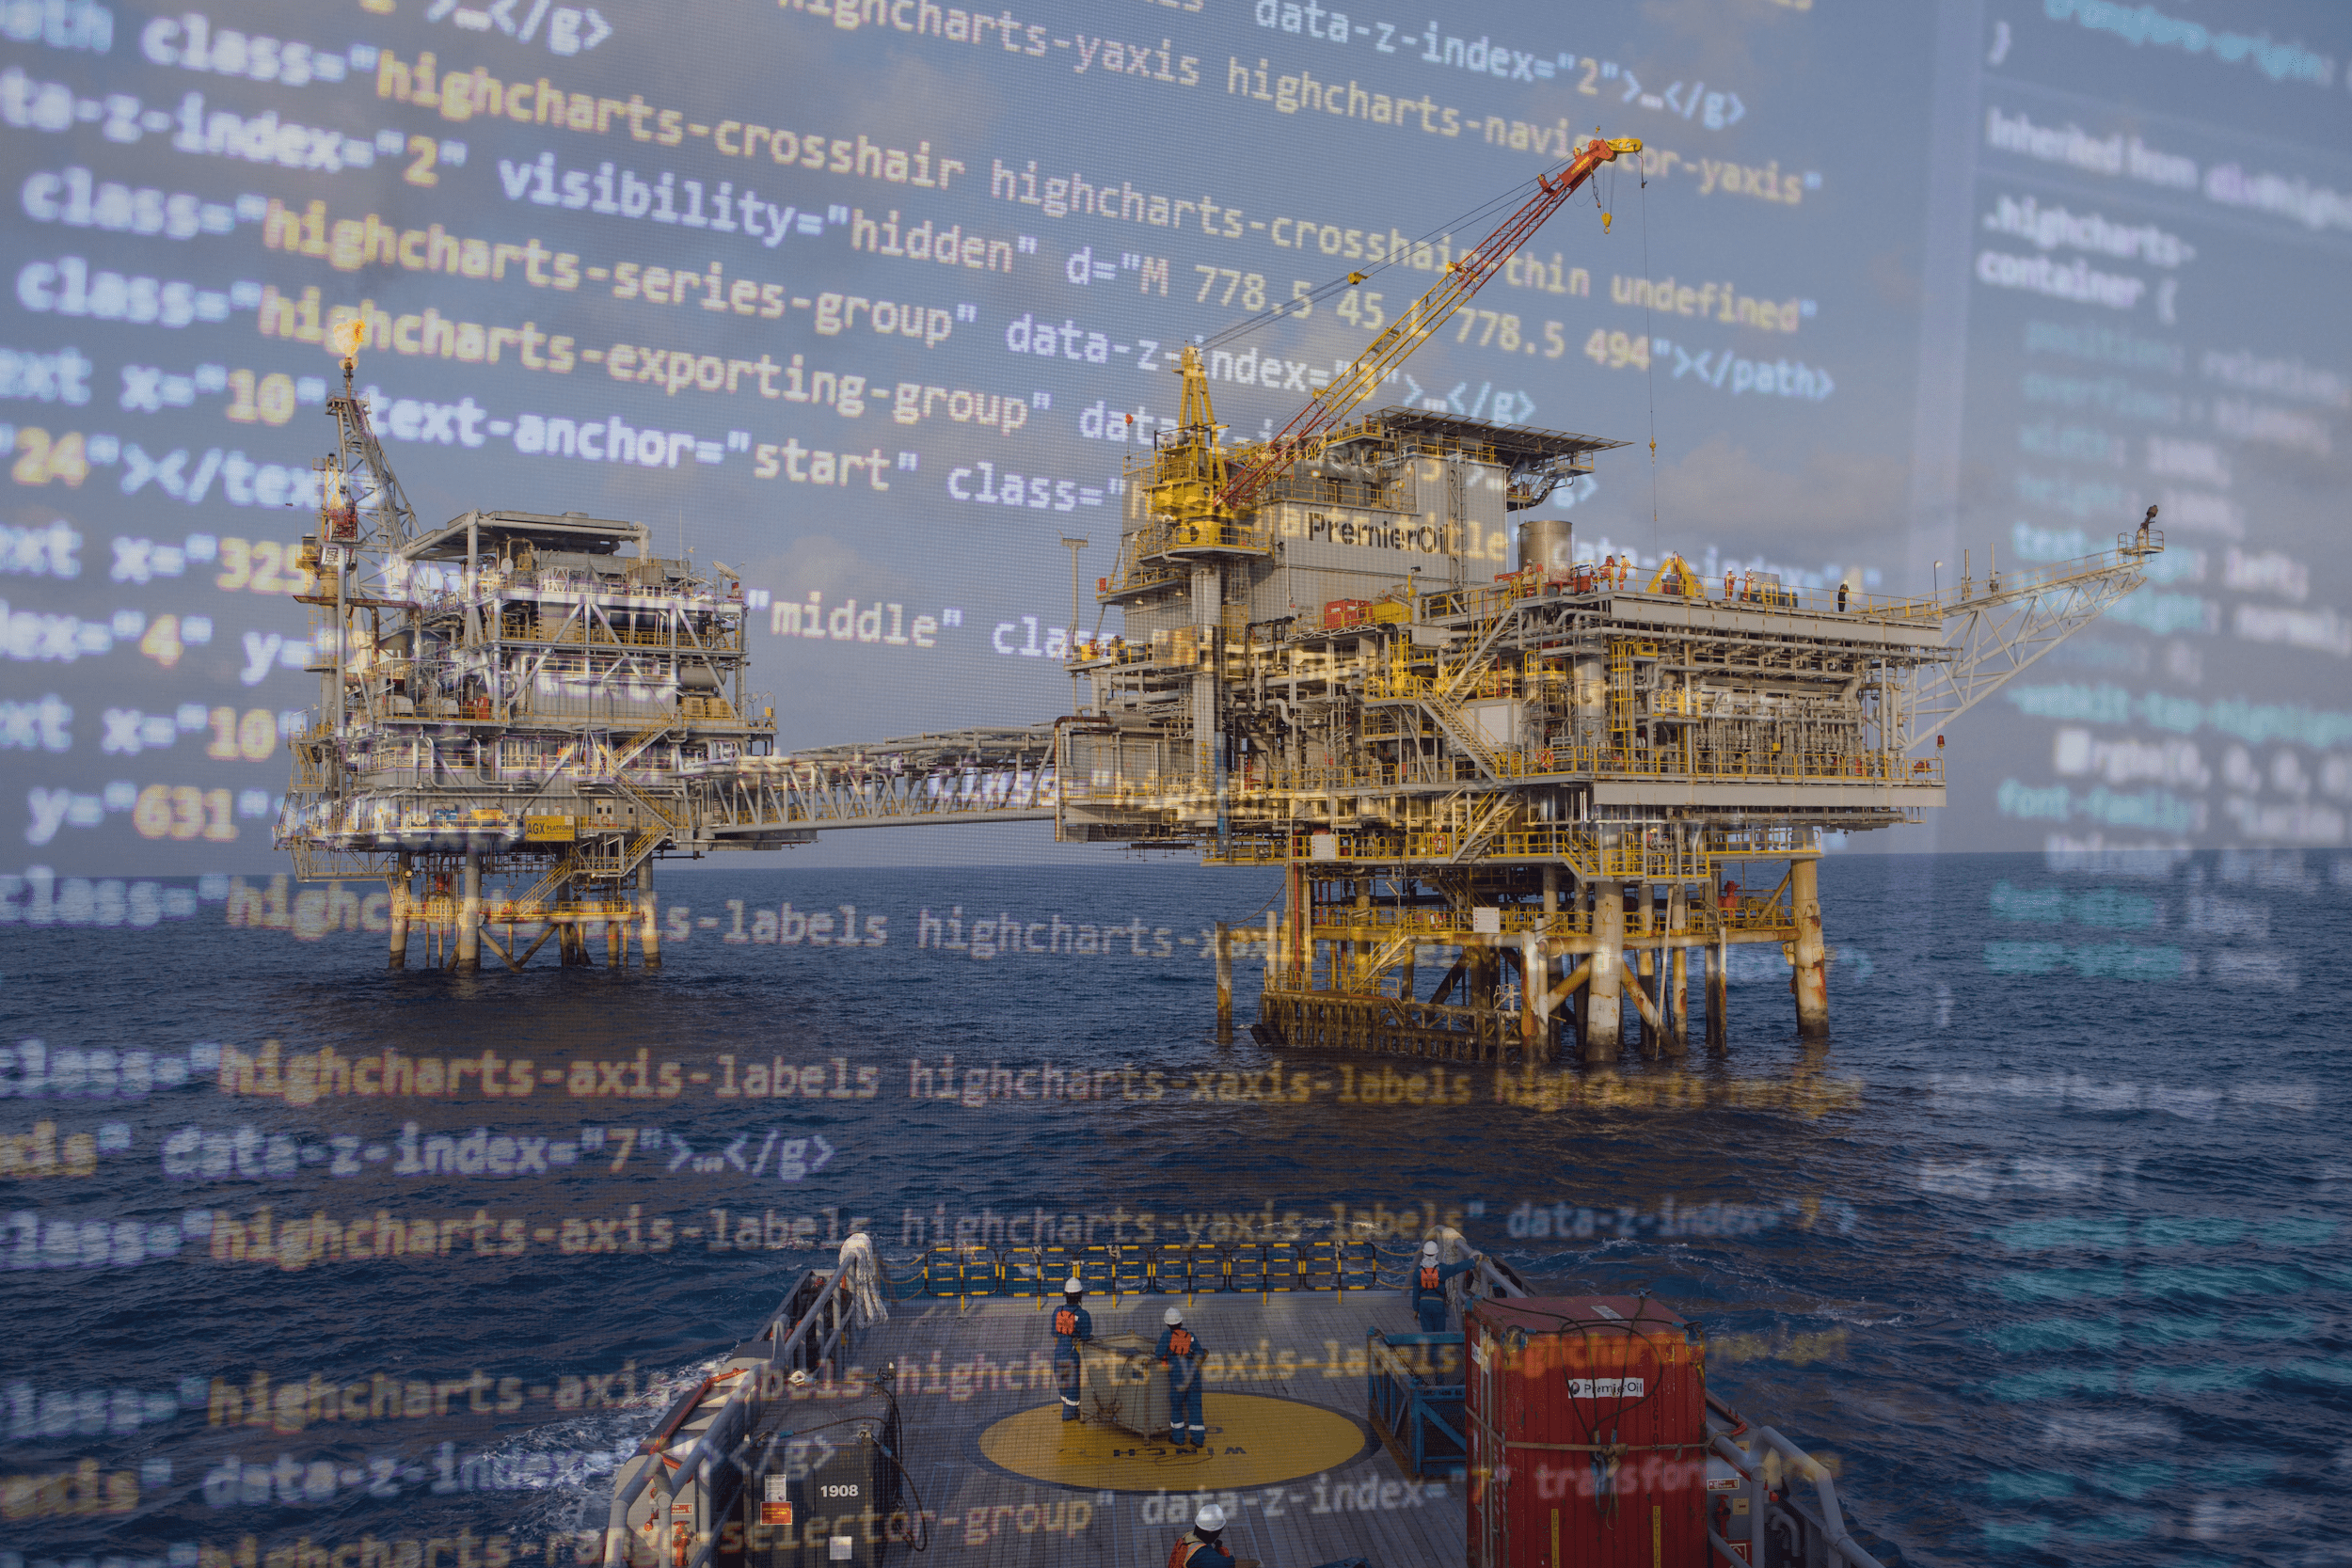 Data analytics hiring levels in the offshore industry rose in October 2021